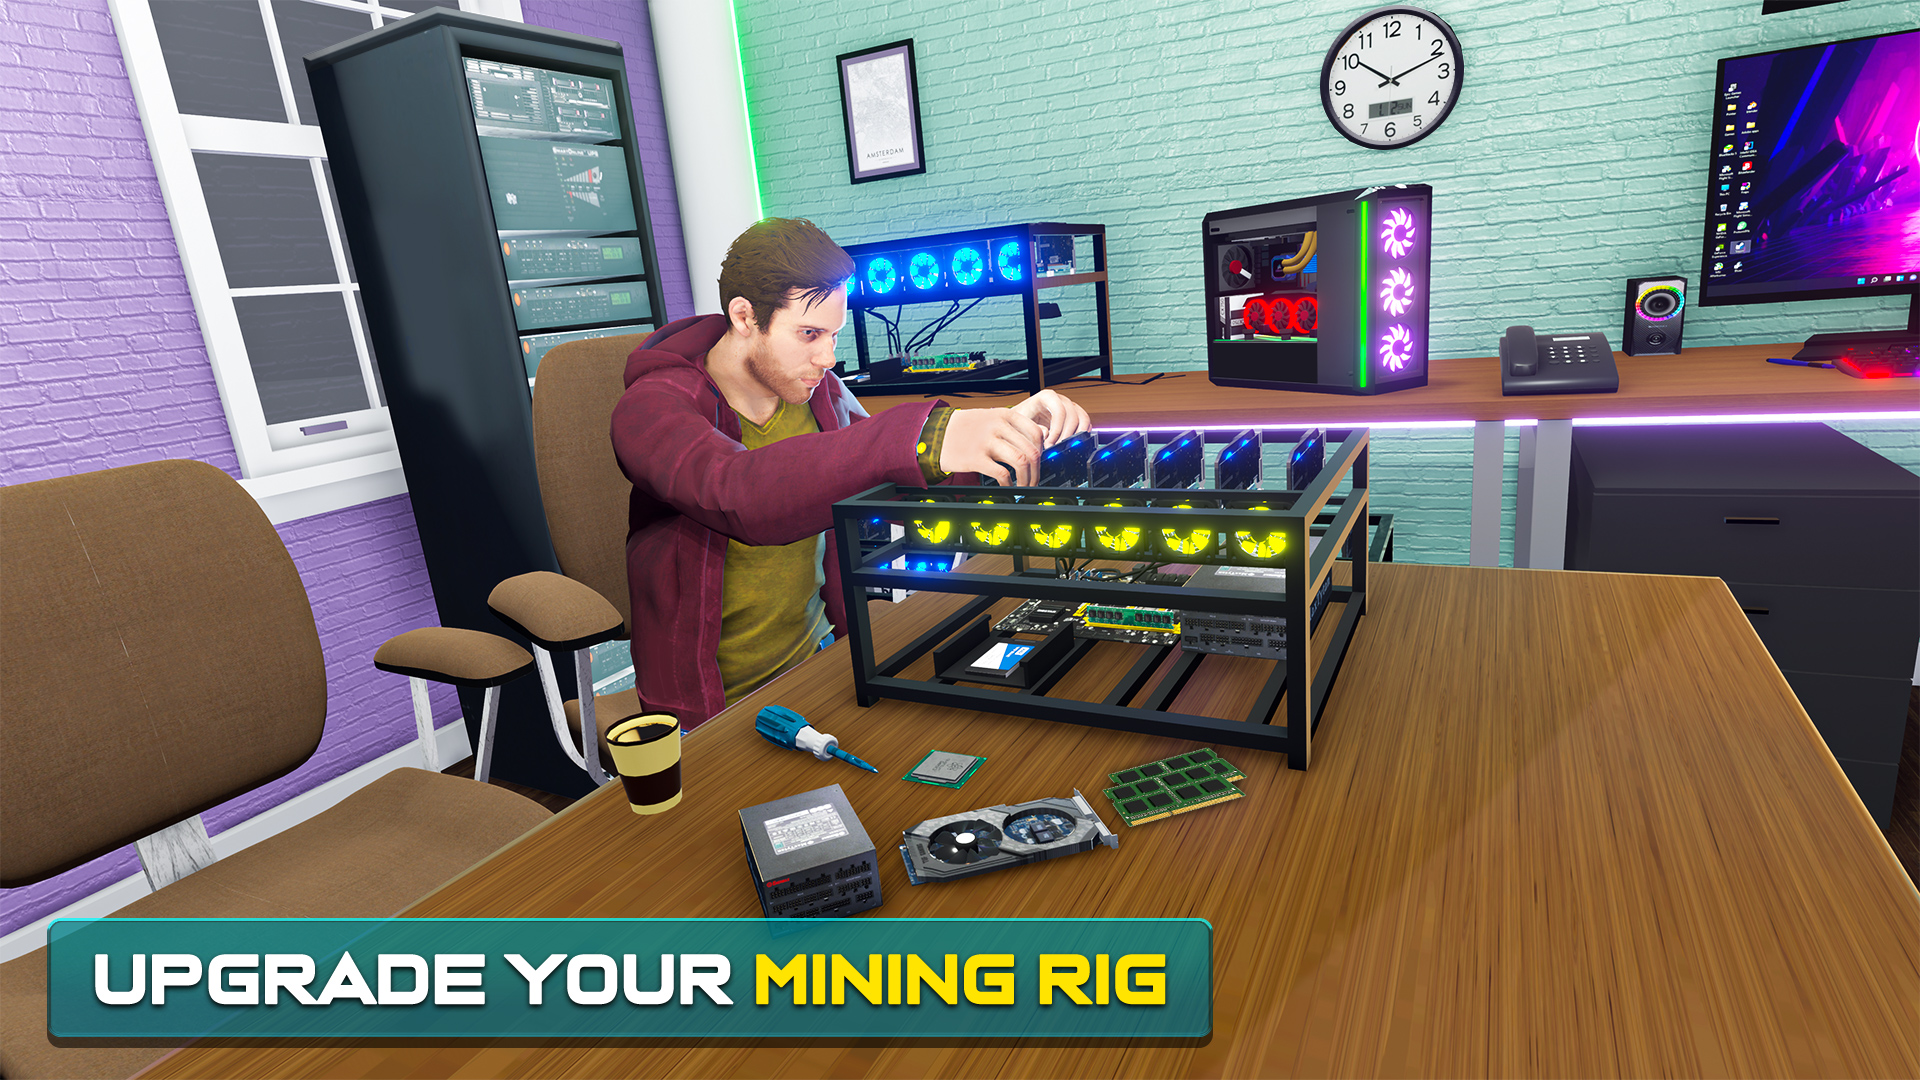 Download Crypto Mining PC Builder Sim on PC with MEmu